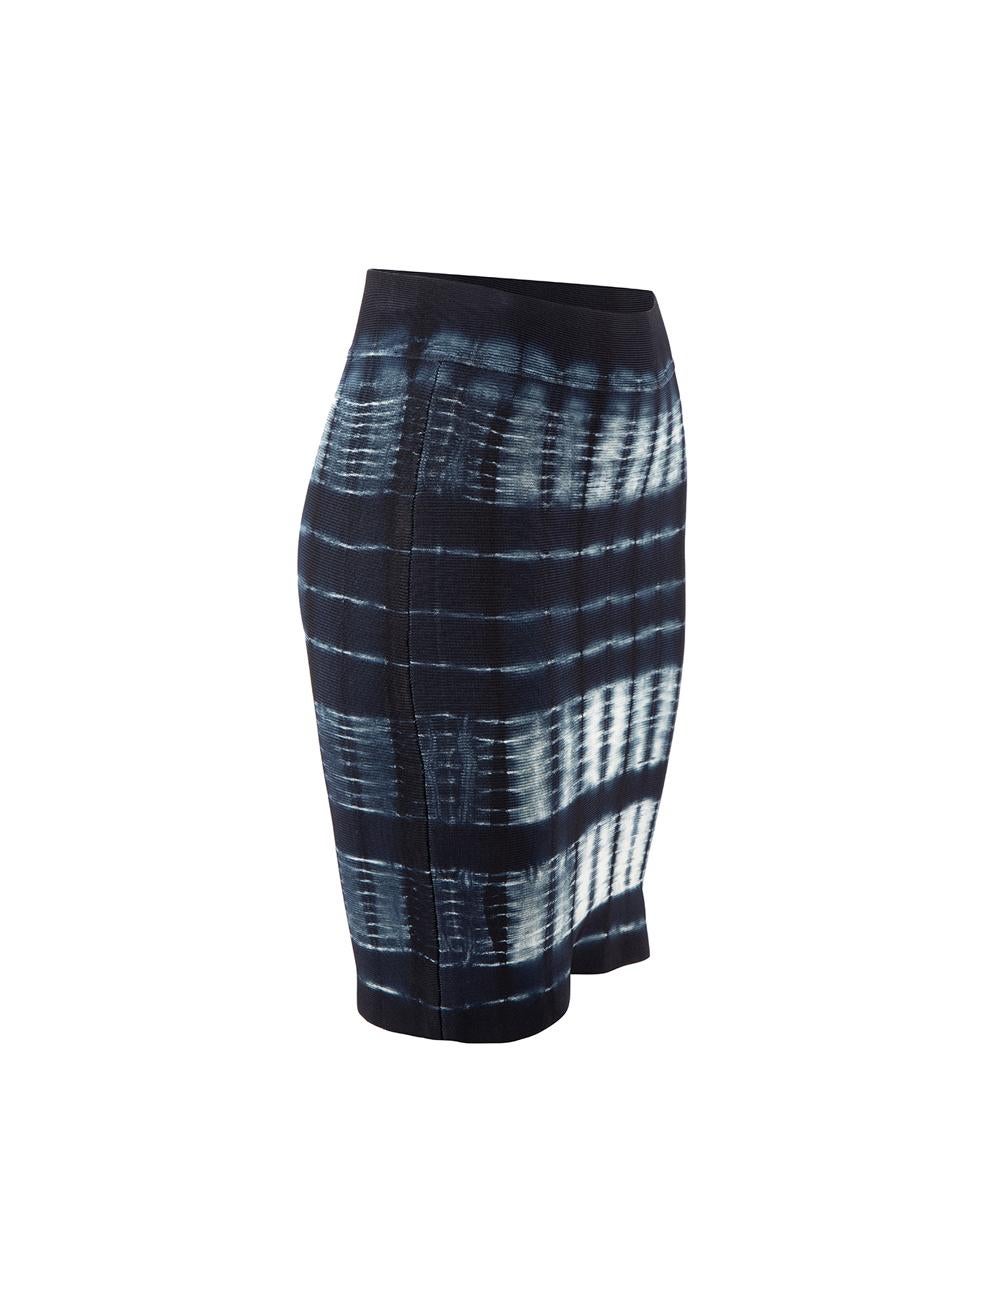 CONDITION is Very good. Minimal wear to skirt is evident. Minimal wear to the waistband where a hanger imprint is evident on this used BCBG Max Azria designer resale item. 
 
 Details
  Blue
 Synthetic
 Mini body con skirt
 Tie dye pattern
